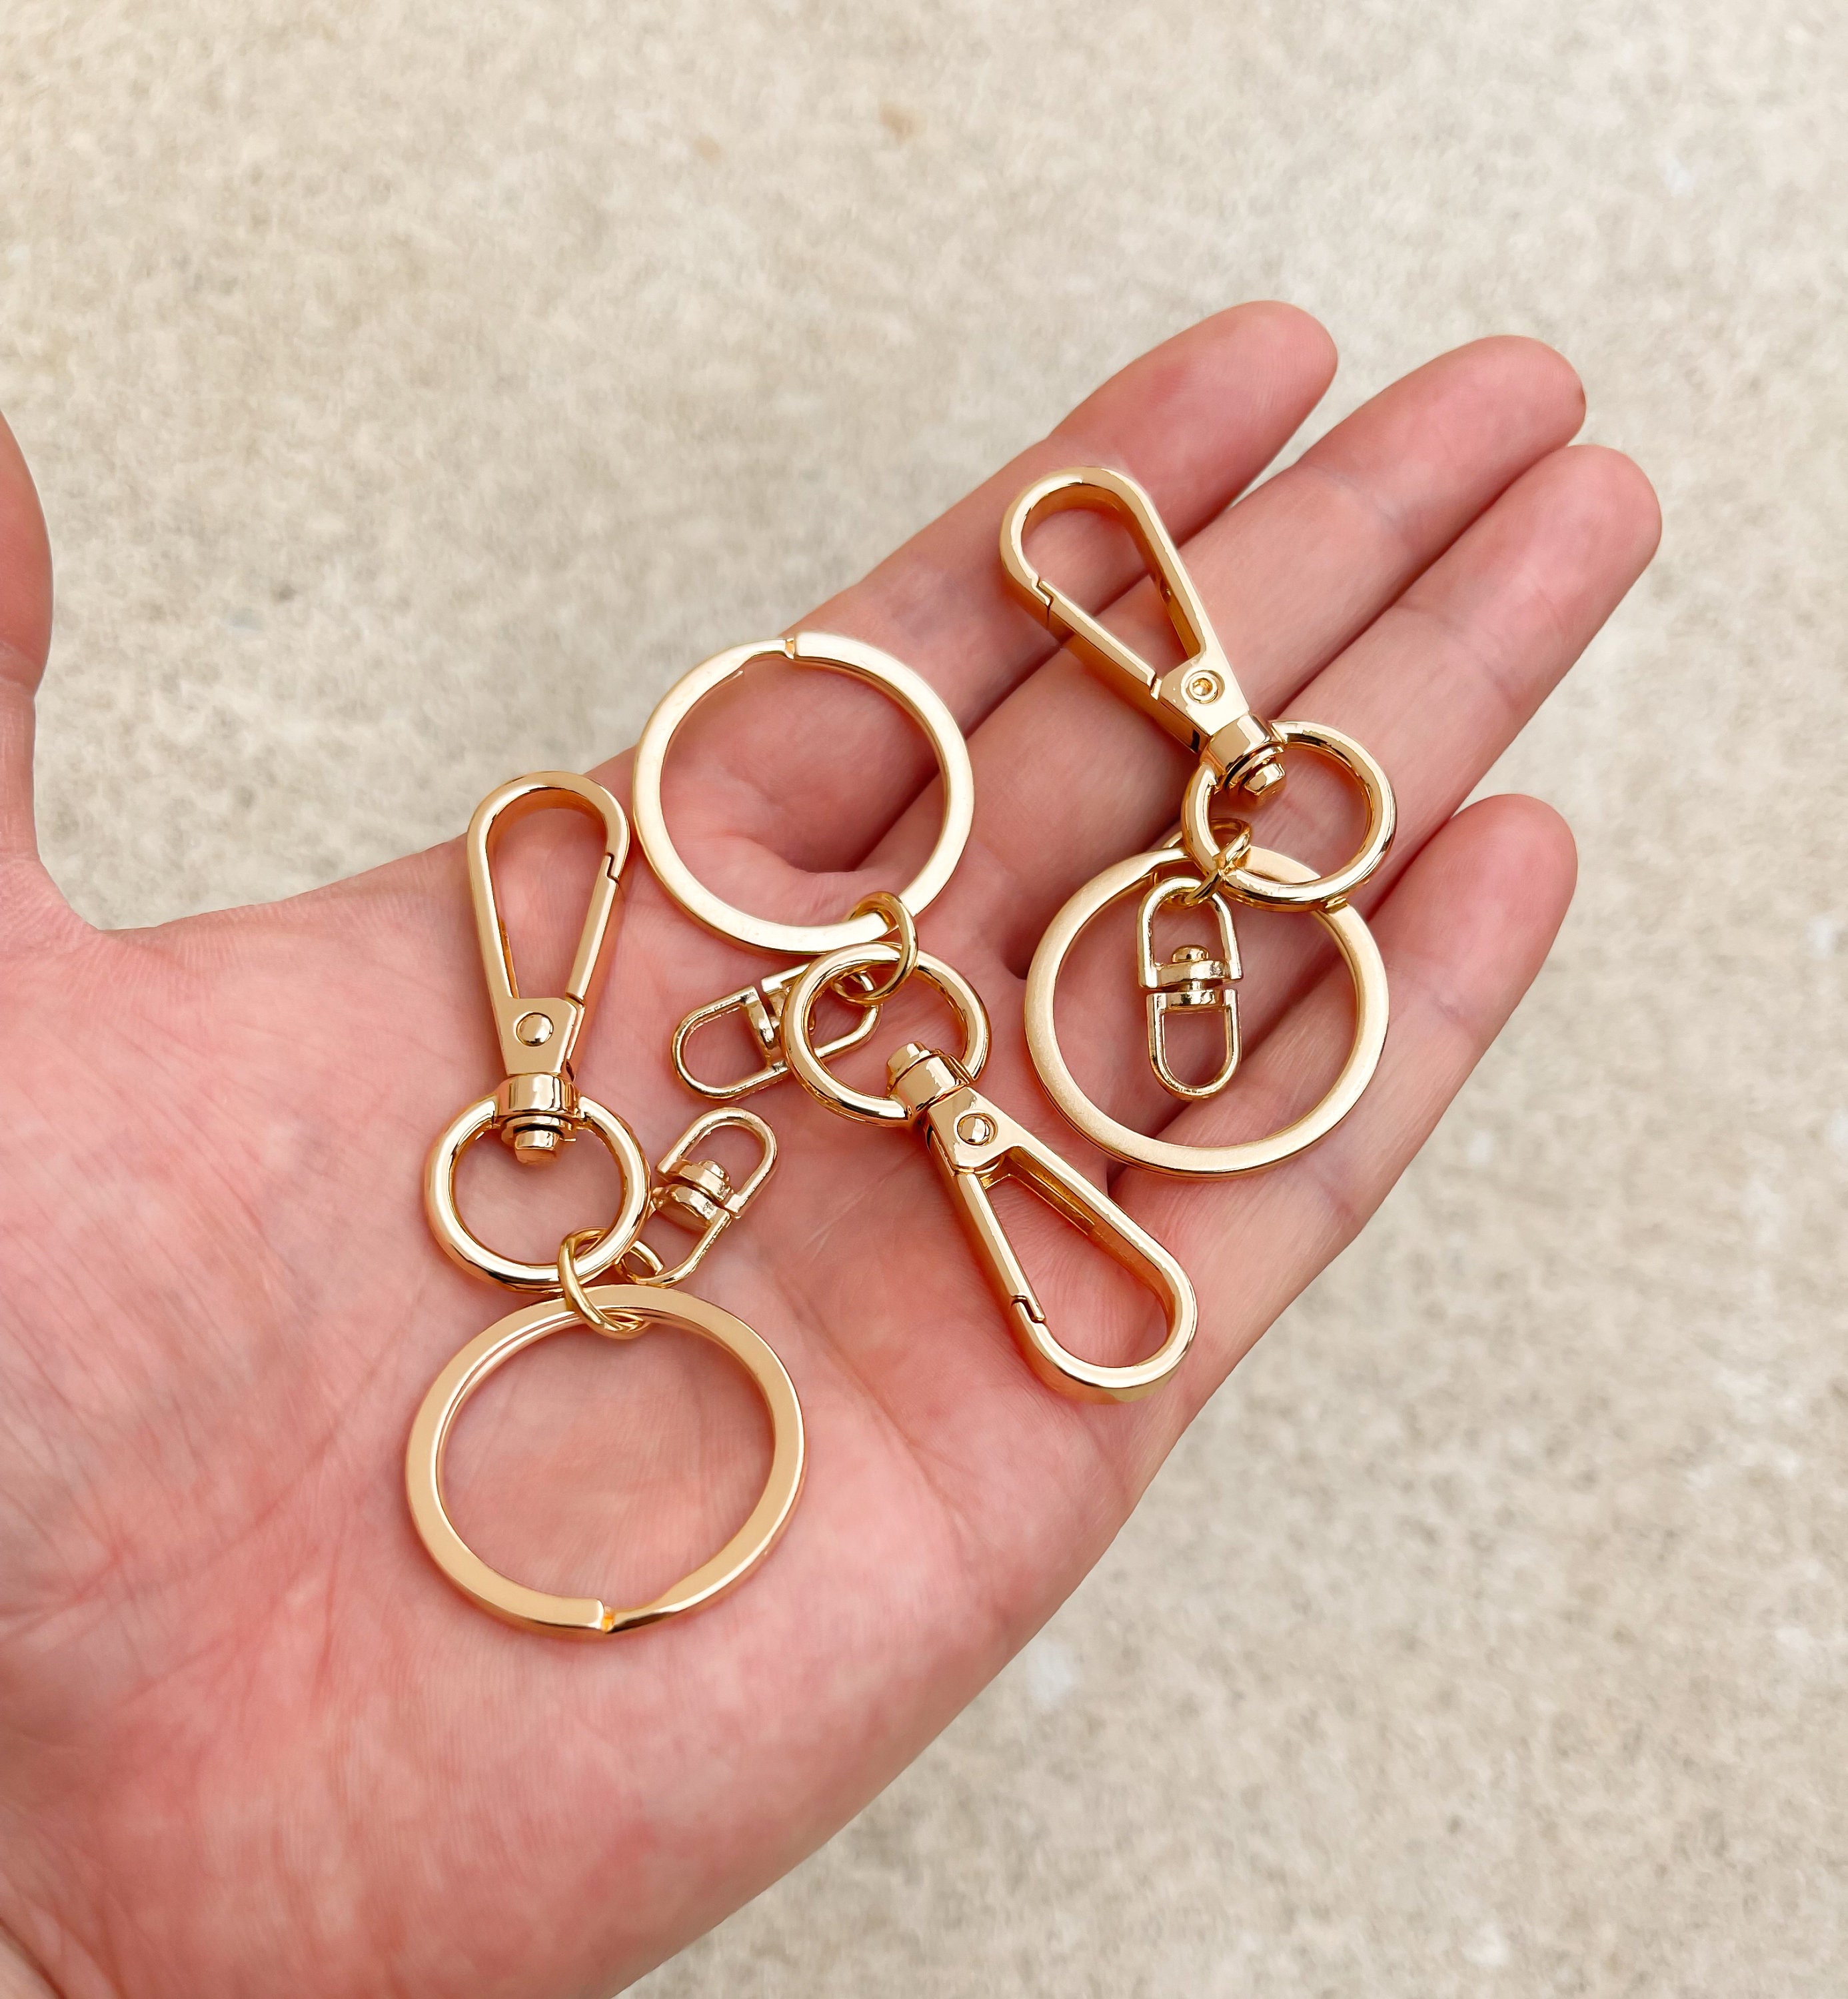 PACK of 10x5mm Alloy Lobster Claw Clasp, Golden Color Metal, Pack of Lobster  Claw Clasps, Standard Clasps, Gold Metal Findings 